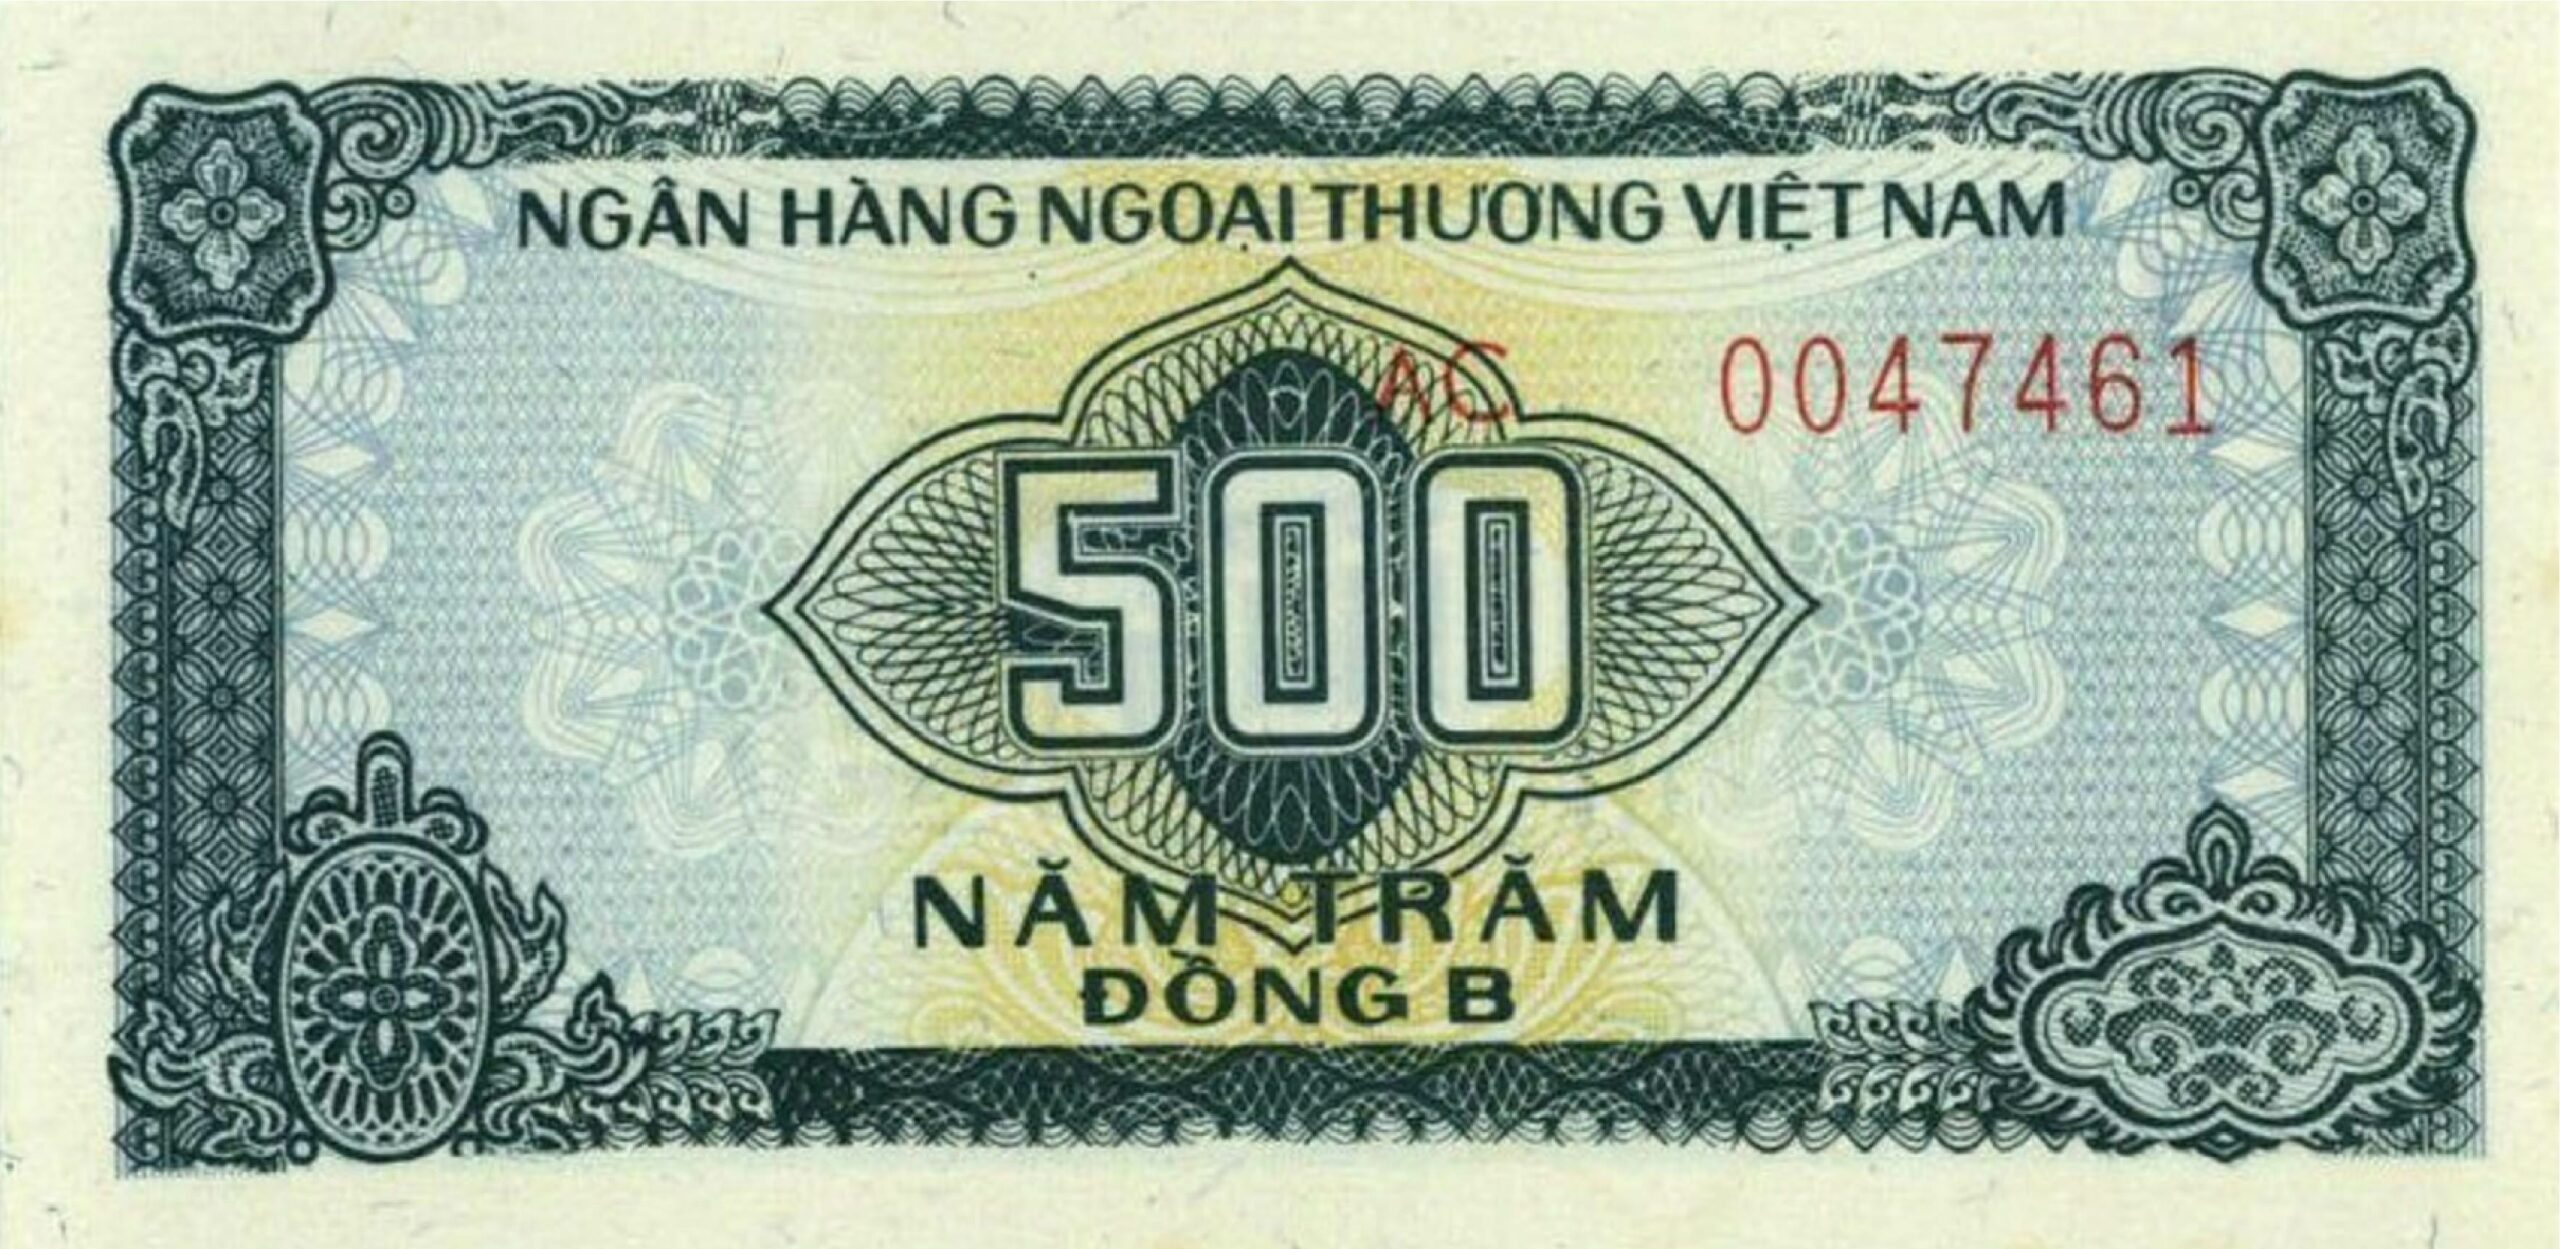 500 Vietnamese Dong foreign exchange certificate